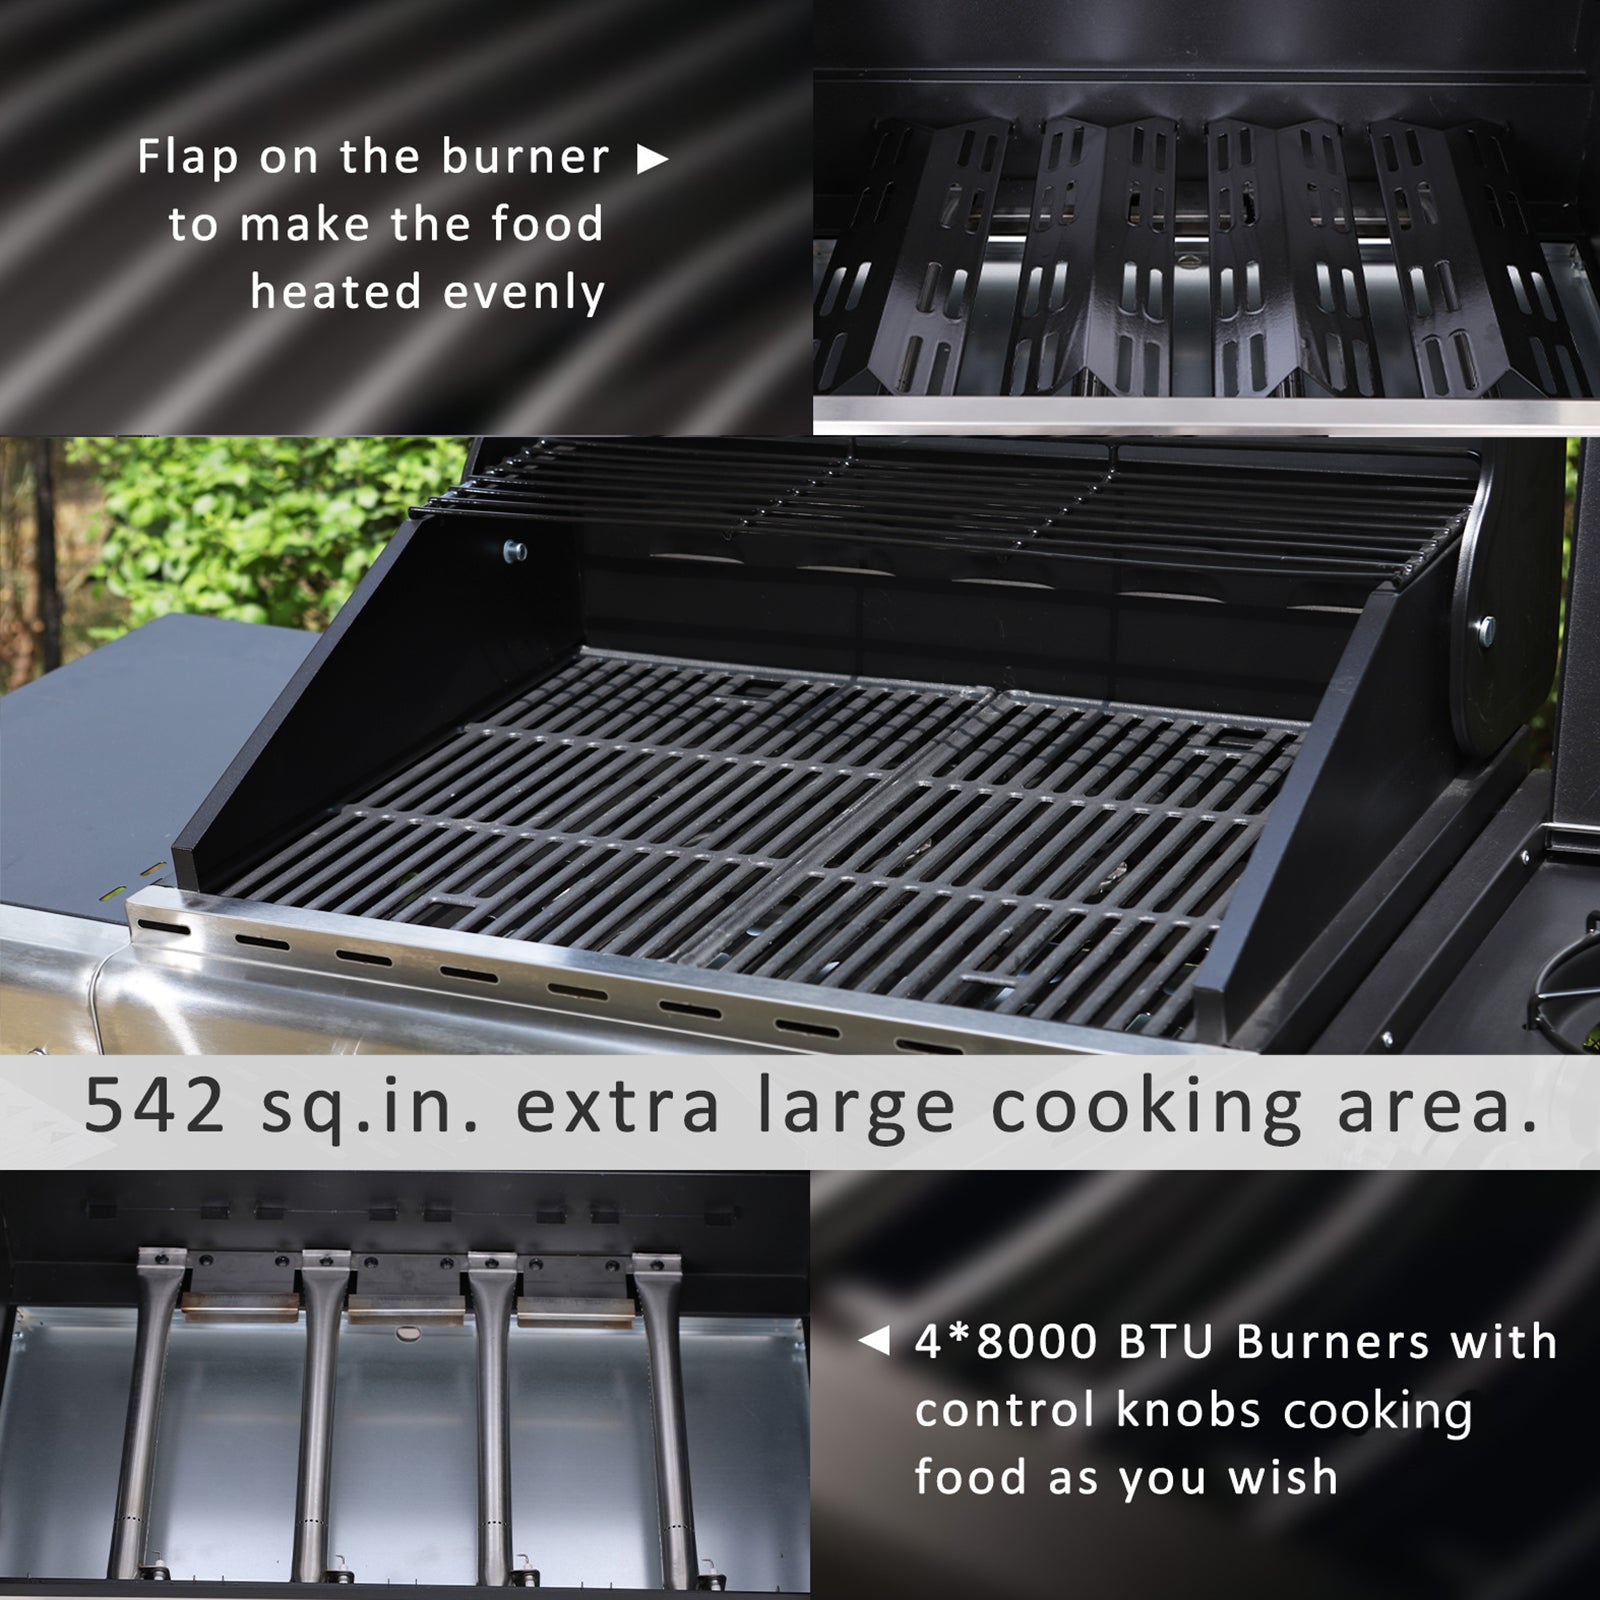 Captiva Designs Portable Propane Grill, 15,000 BTU Output TableTop Liquid  Gas Grill with 2 Stainless Steel Burners, 275 sq.in. Cooking Area with Side